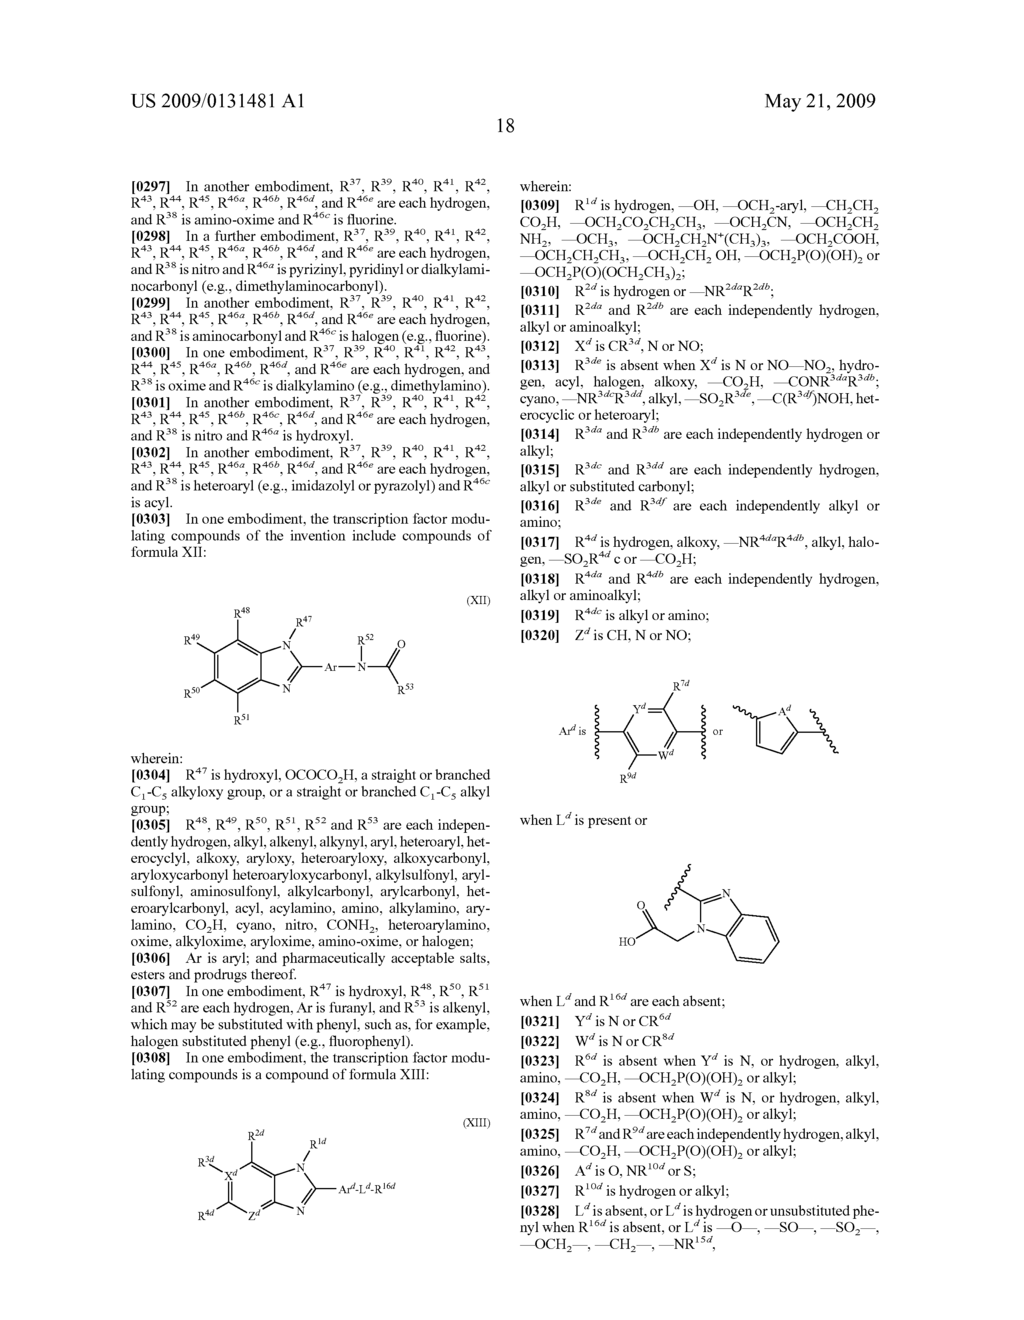 Transcription Factor Modulating Compounds and Methods of Use Thereof - diagram, schematic, and image 25